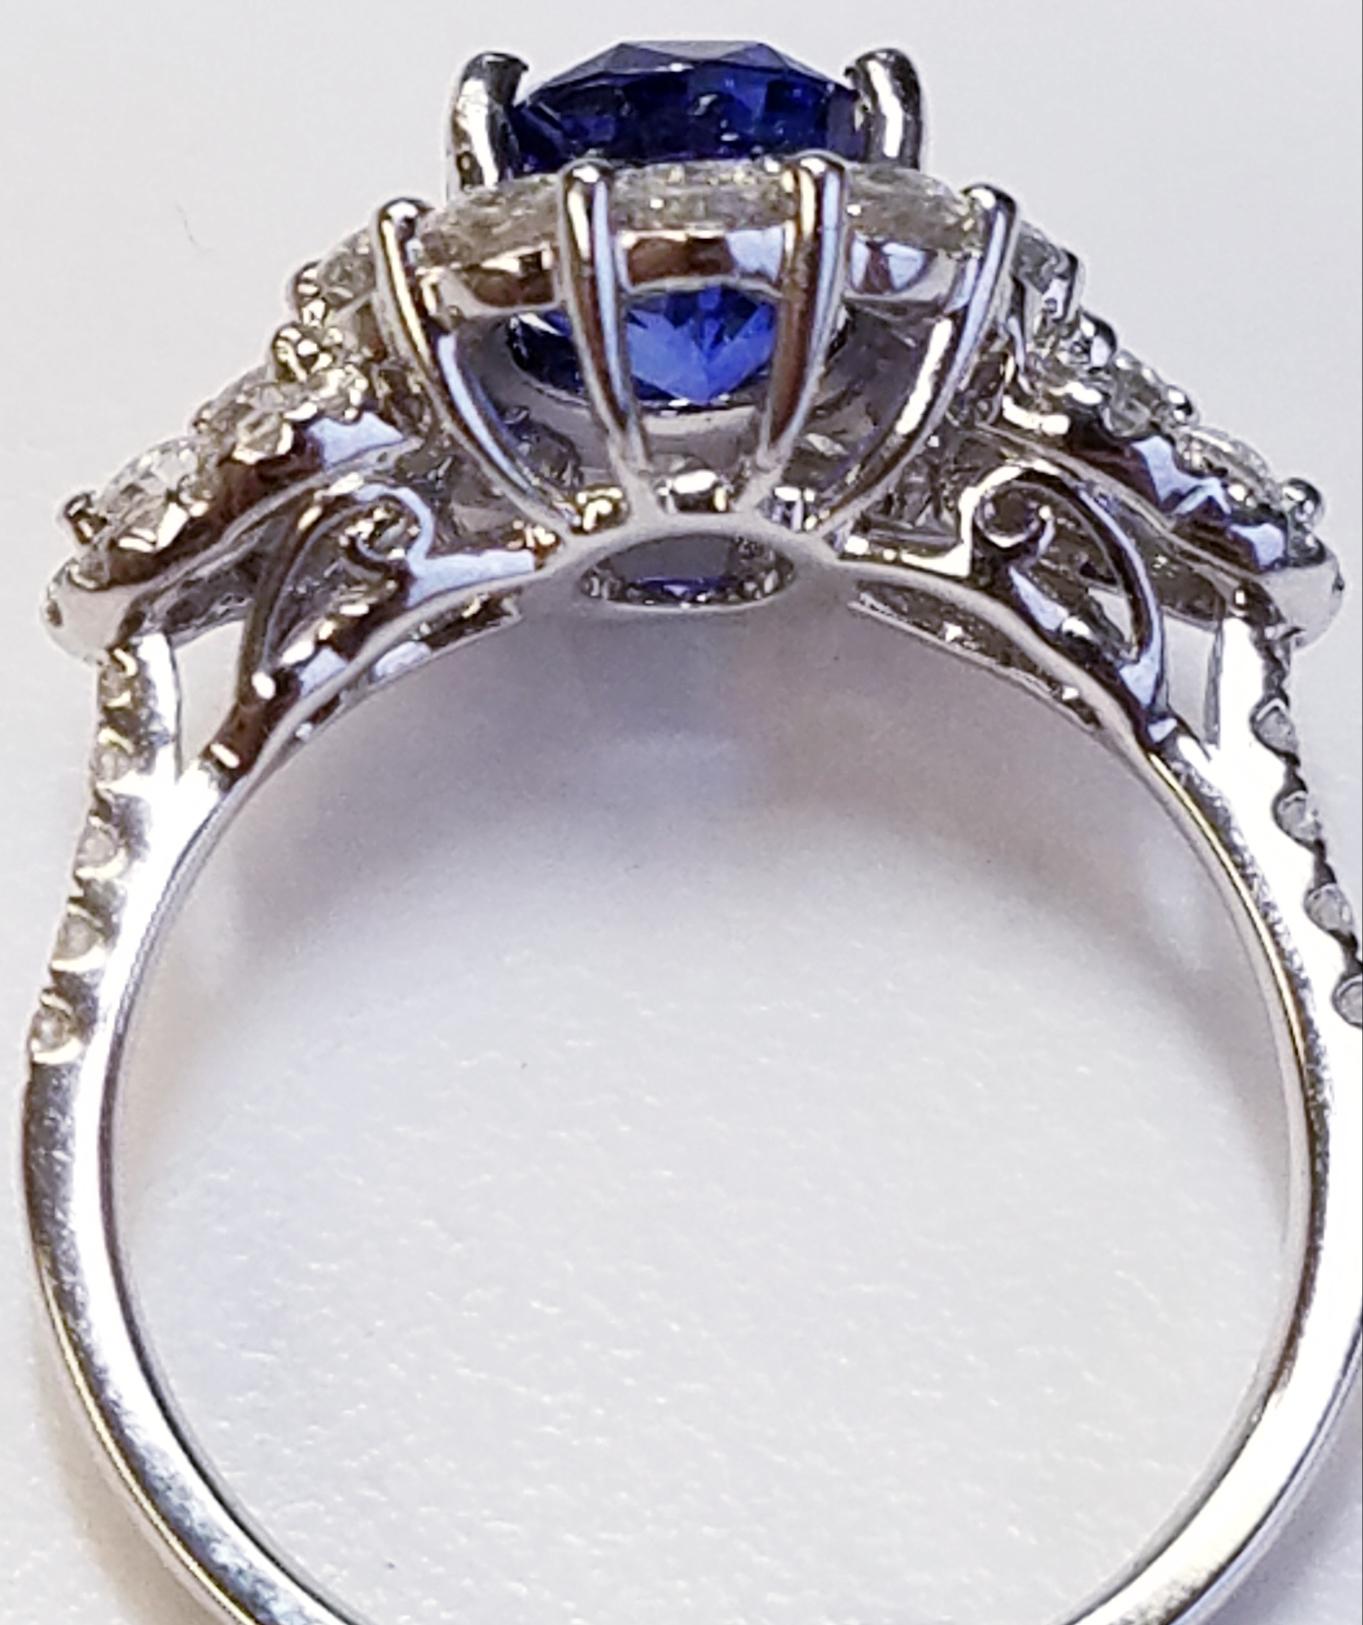 18k White Gold Oval Cut Blue Sapphire and Diamond Ring
2.50 carats of Blue Sapphires
1.17 carats of Diamonds
Oval Cut
18k White Gold